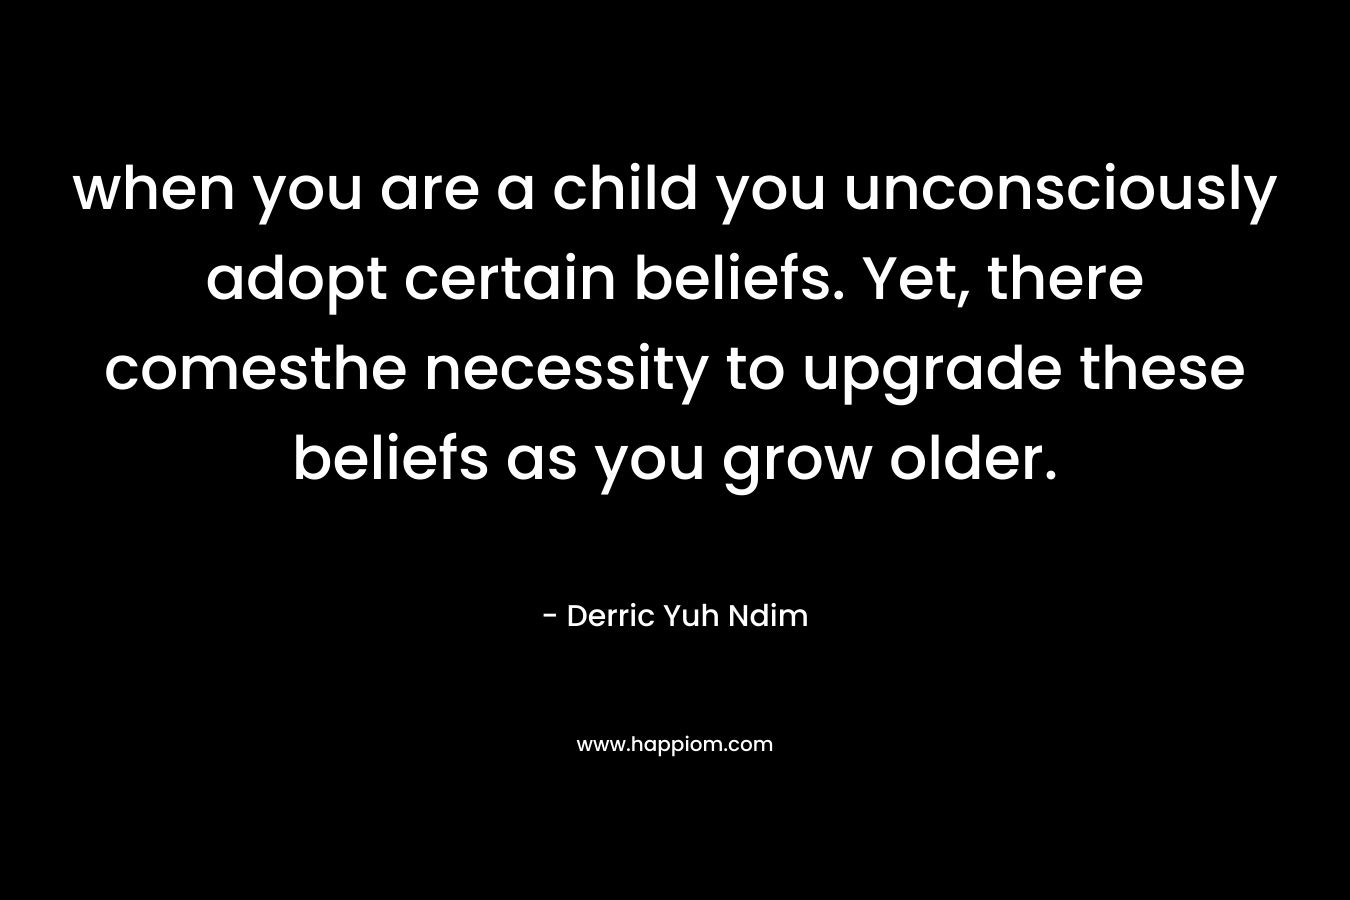 when you are a child you unconsciously adopt certain beliefs. Yet, there comesthe necessity to upgrade these beliefs as you grow older.